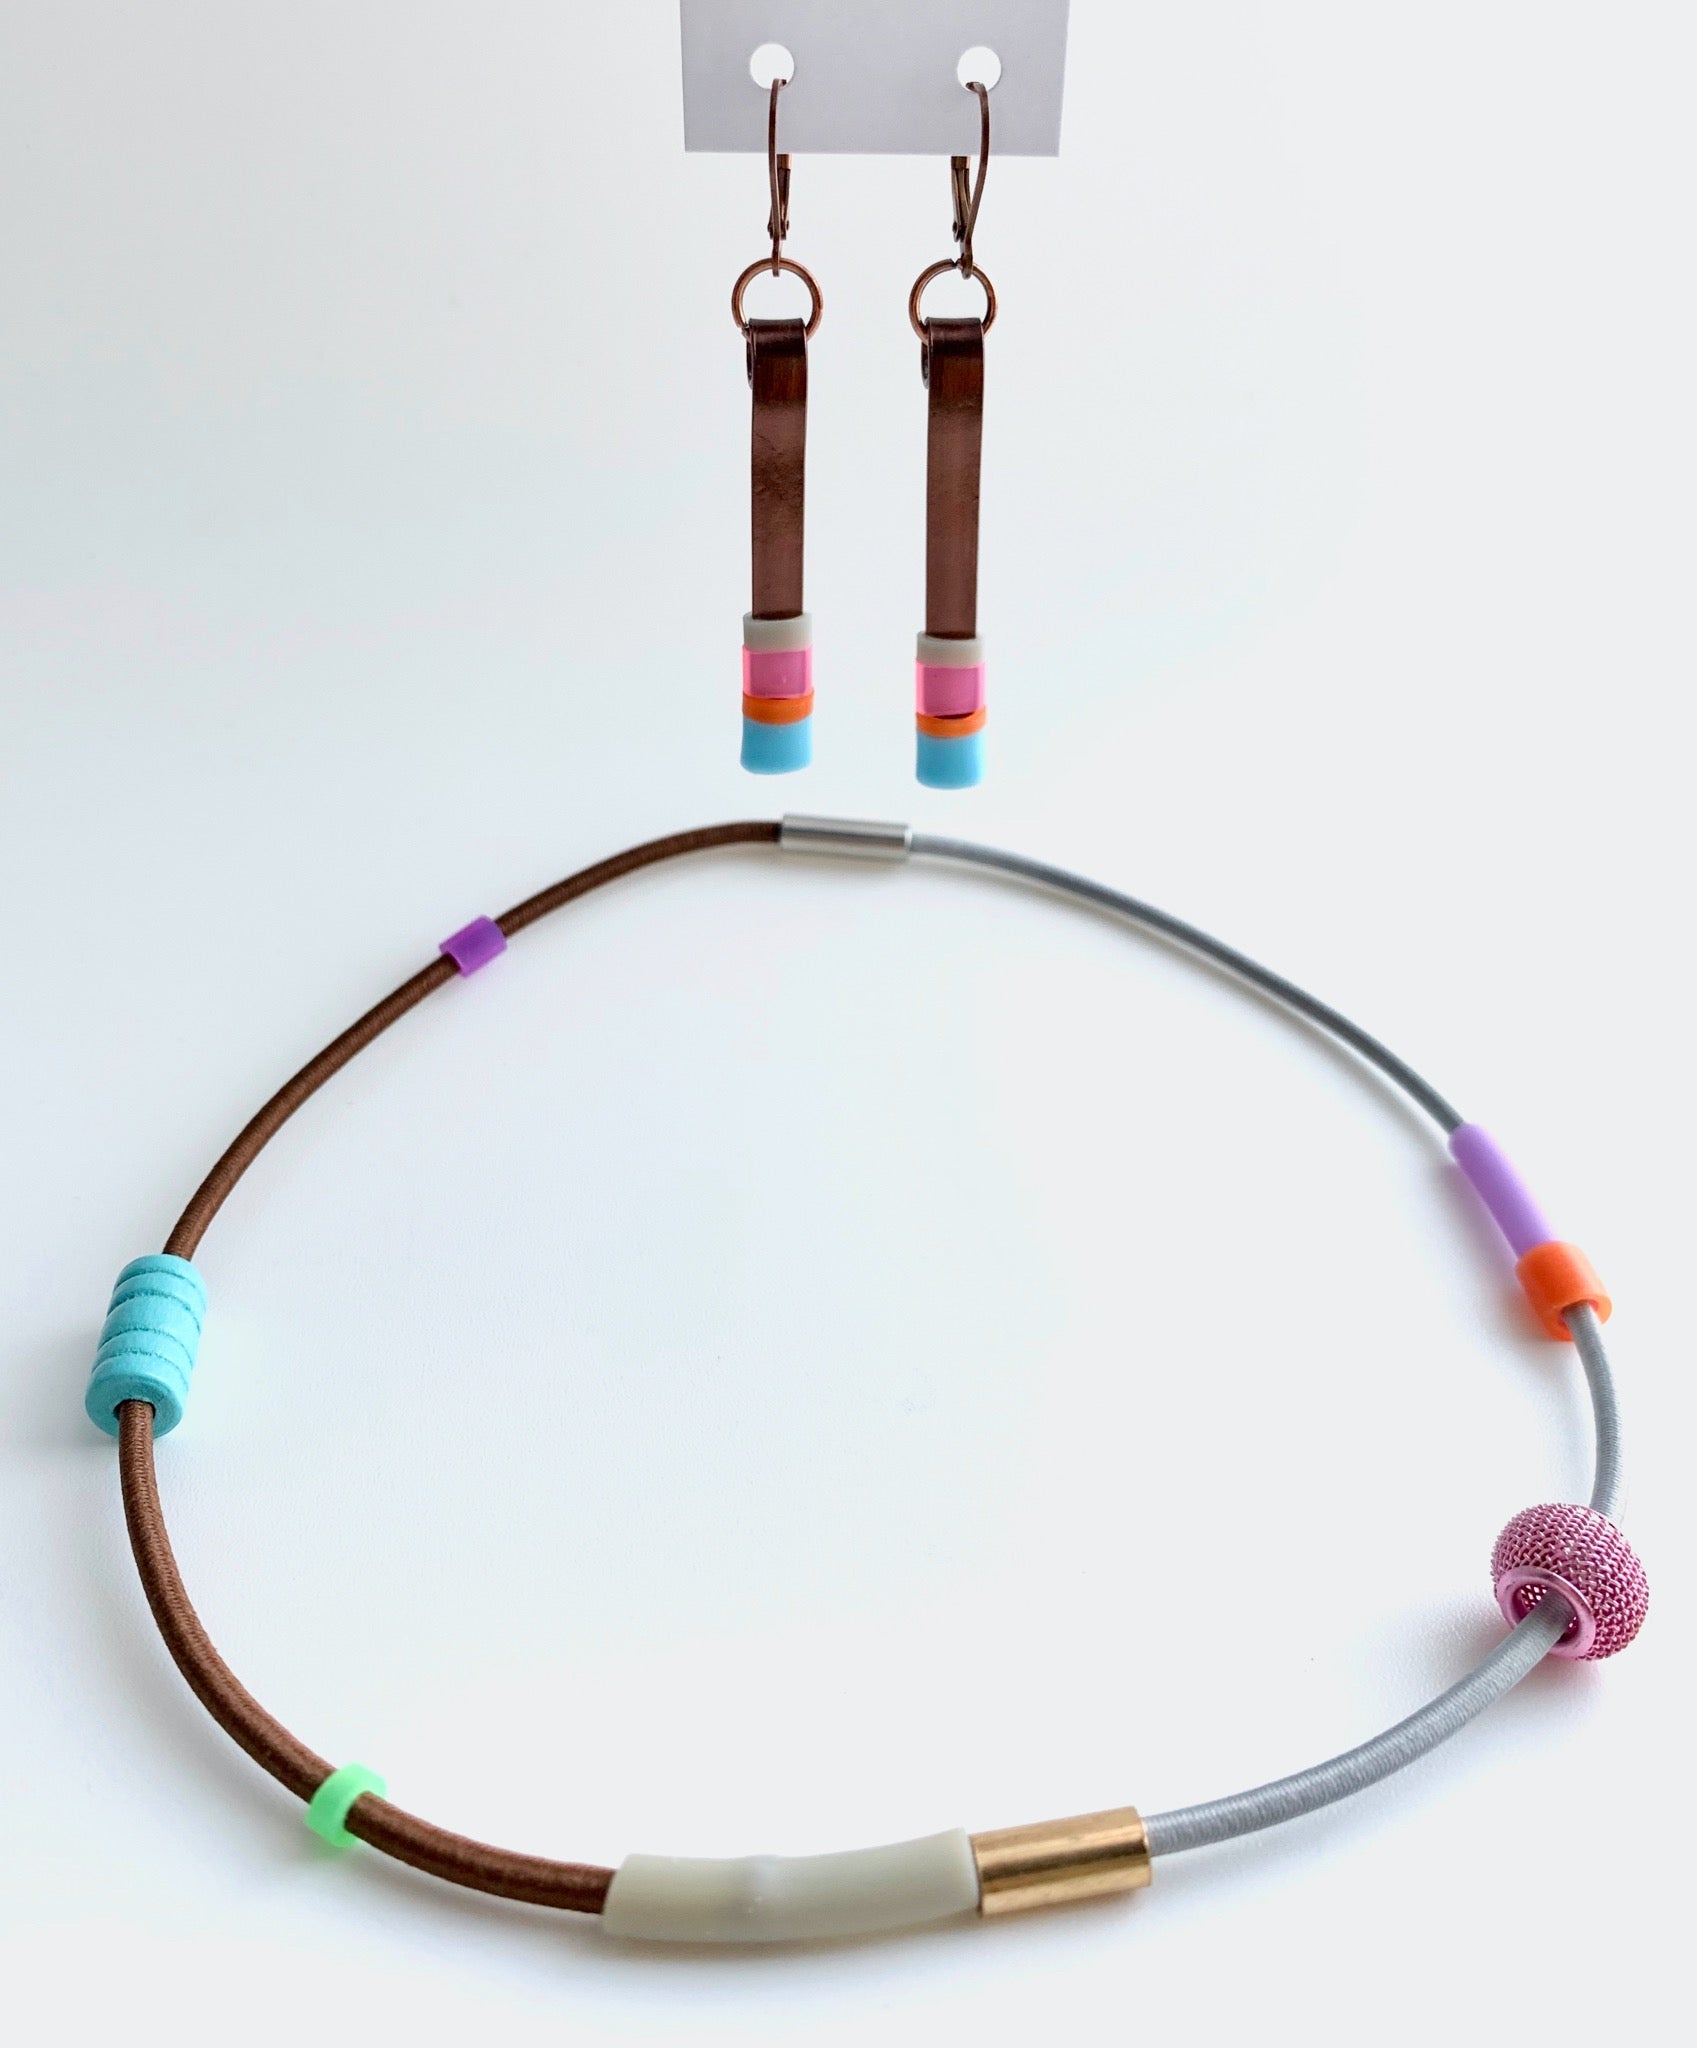 This necklace is made with shock cord silcone, wood and metal beads. It has an interlocking magnetic clasp and hangs 42cm long. This pic also shows Matchstick earrings that pair perfectly with this piece.